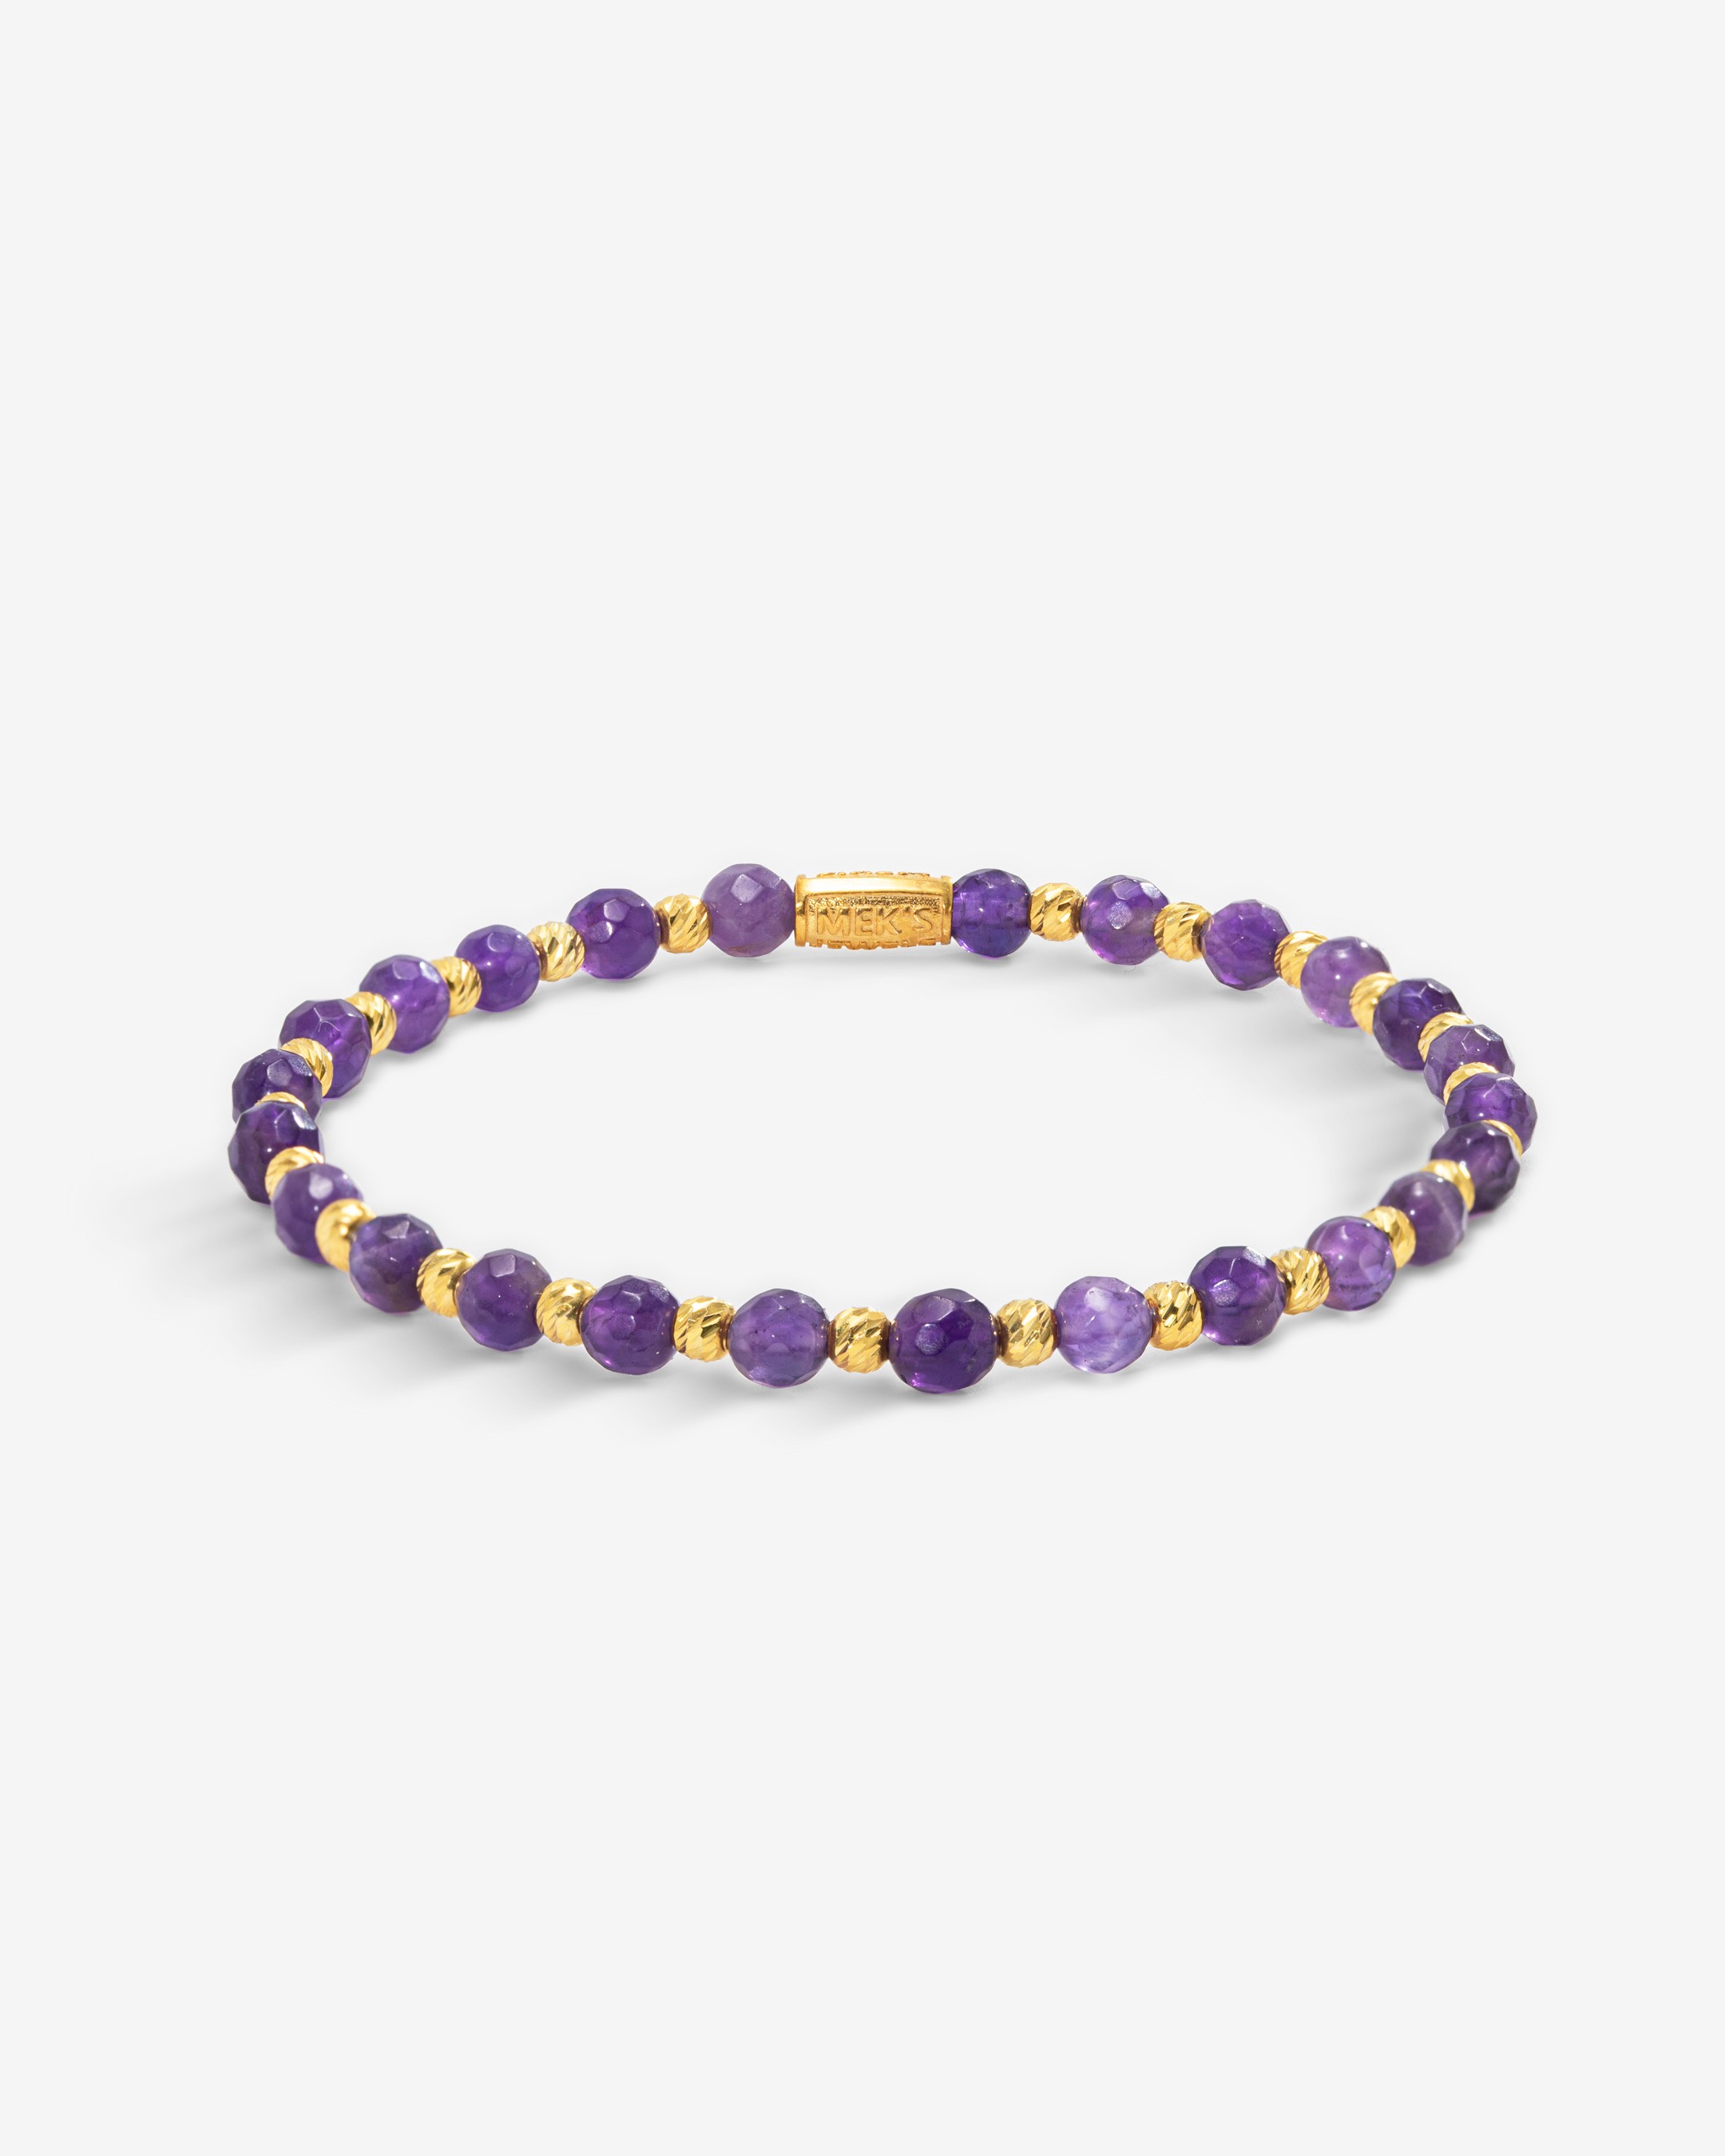 14.9 Carat Sterling Silver Bracelet with Natural Amethyst Stone - Gold